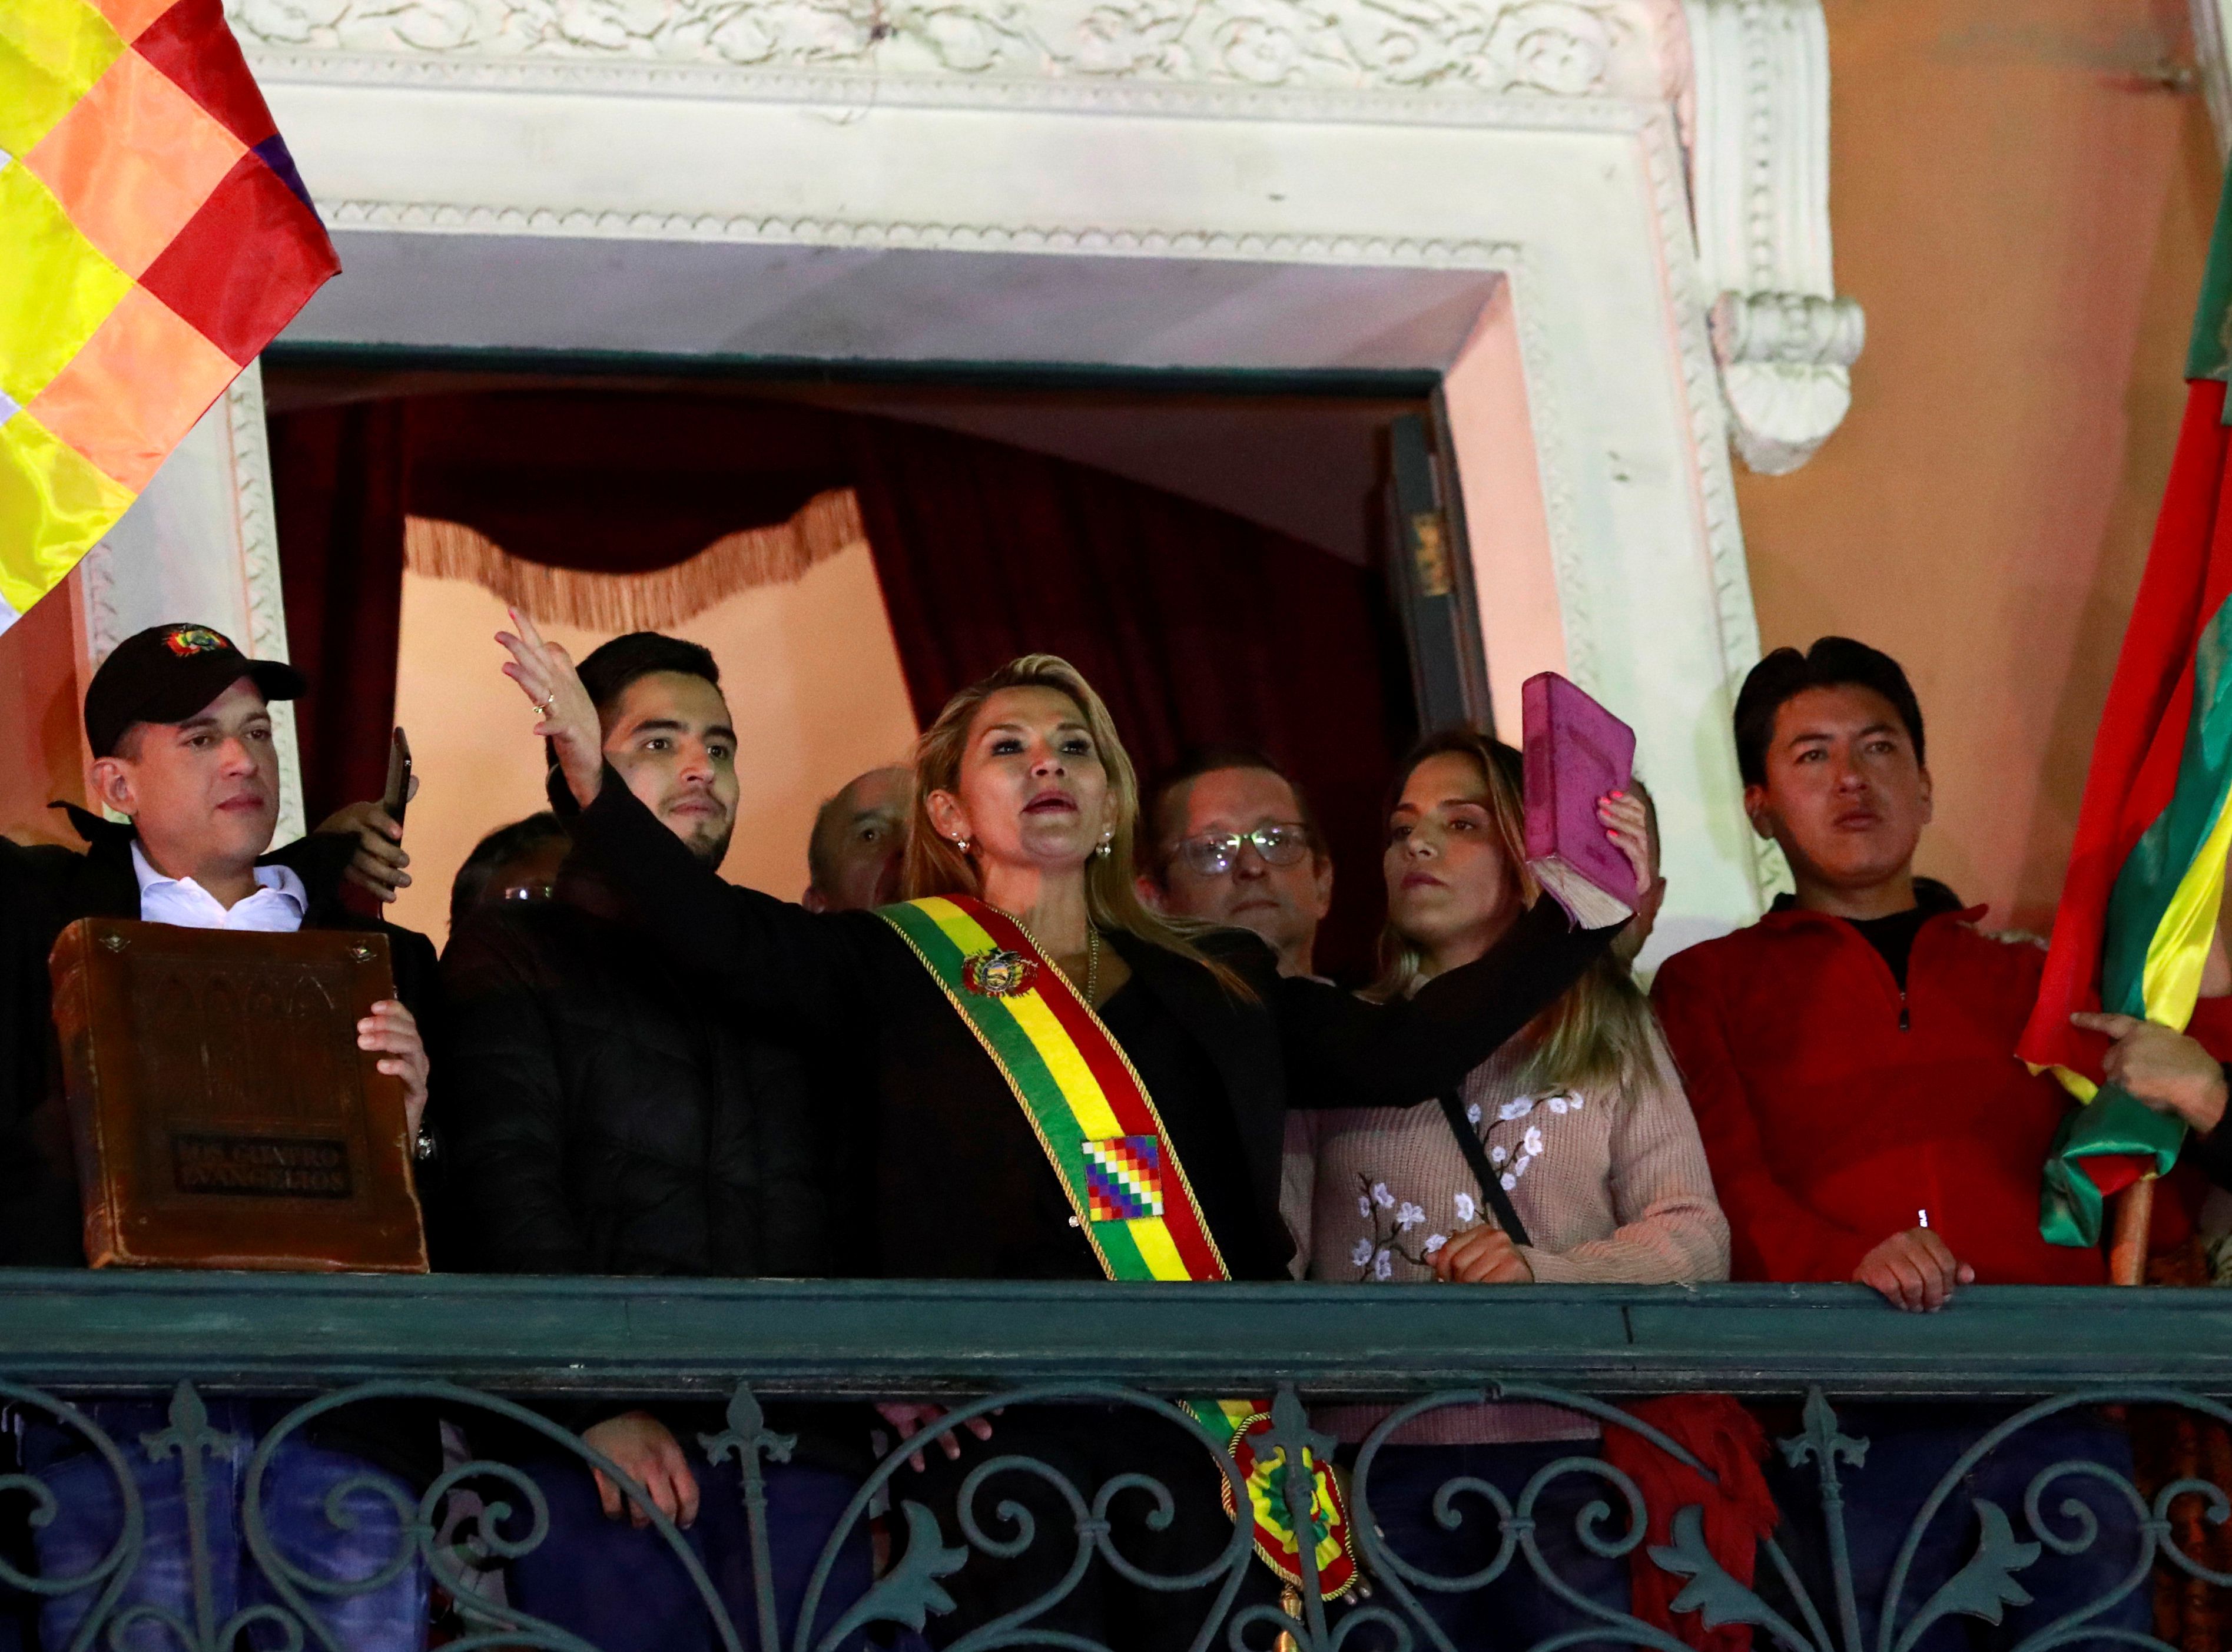 Bolivian Senator Jeanine Anez gestures after she declared herself as Interim President of Bolivia, at the balcony of the Presidential Palace, in La Paz, Bolivia November 12, 2019. REUTERS/Henry Romero